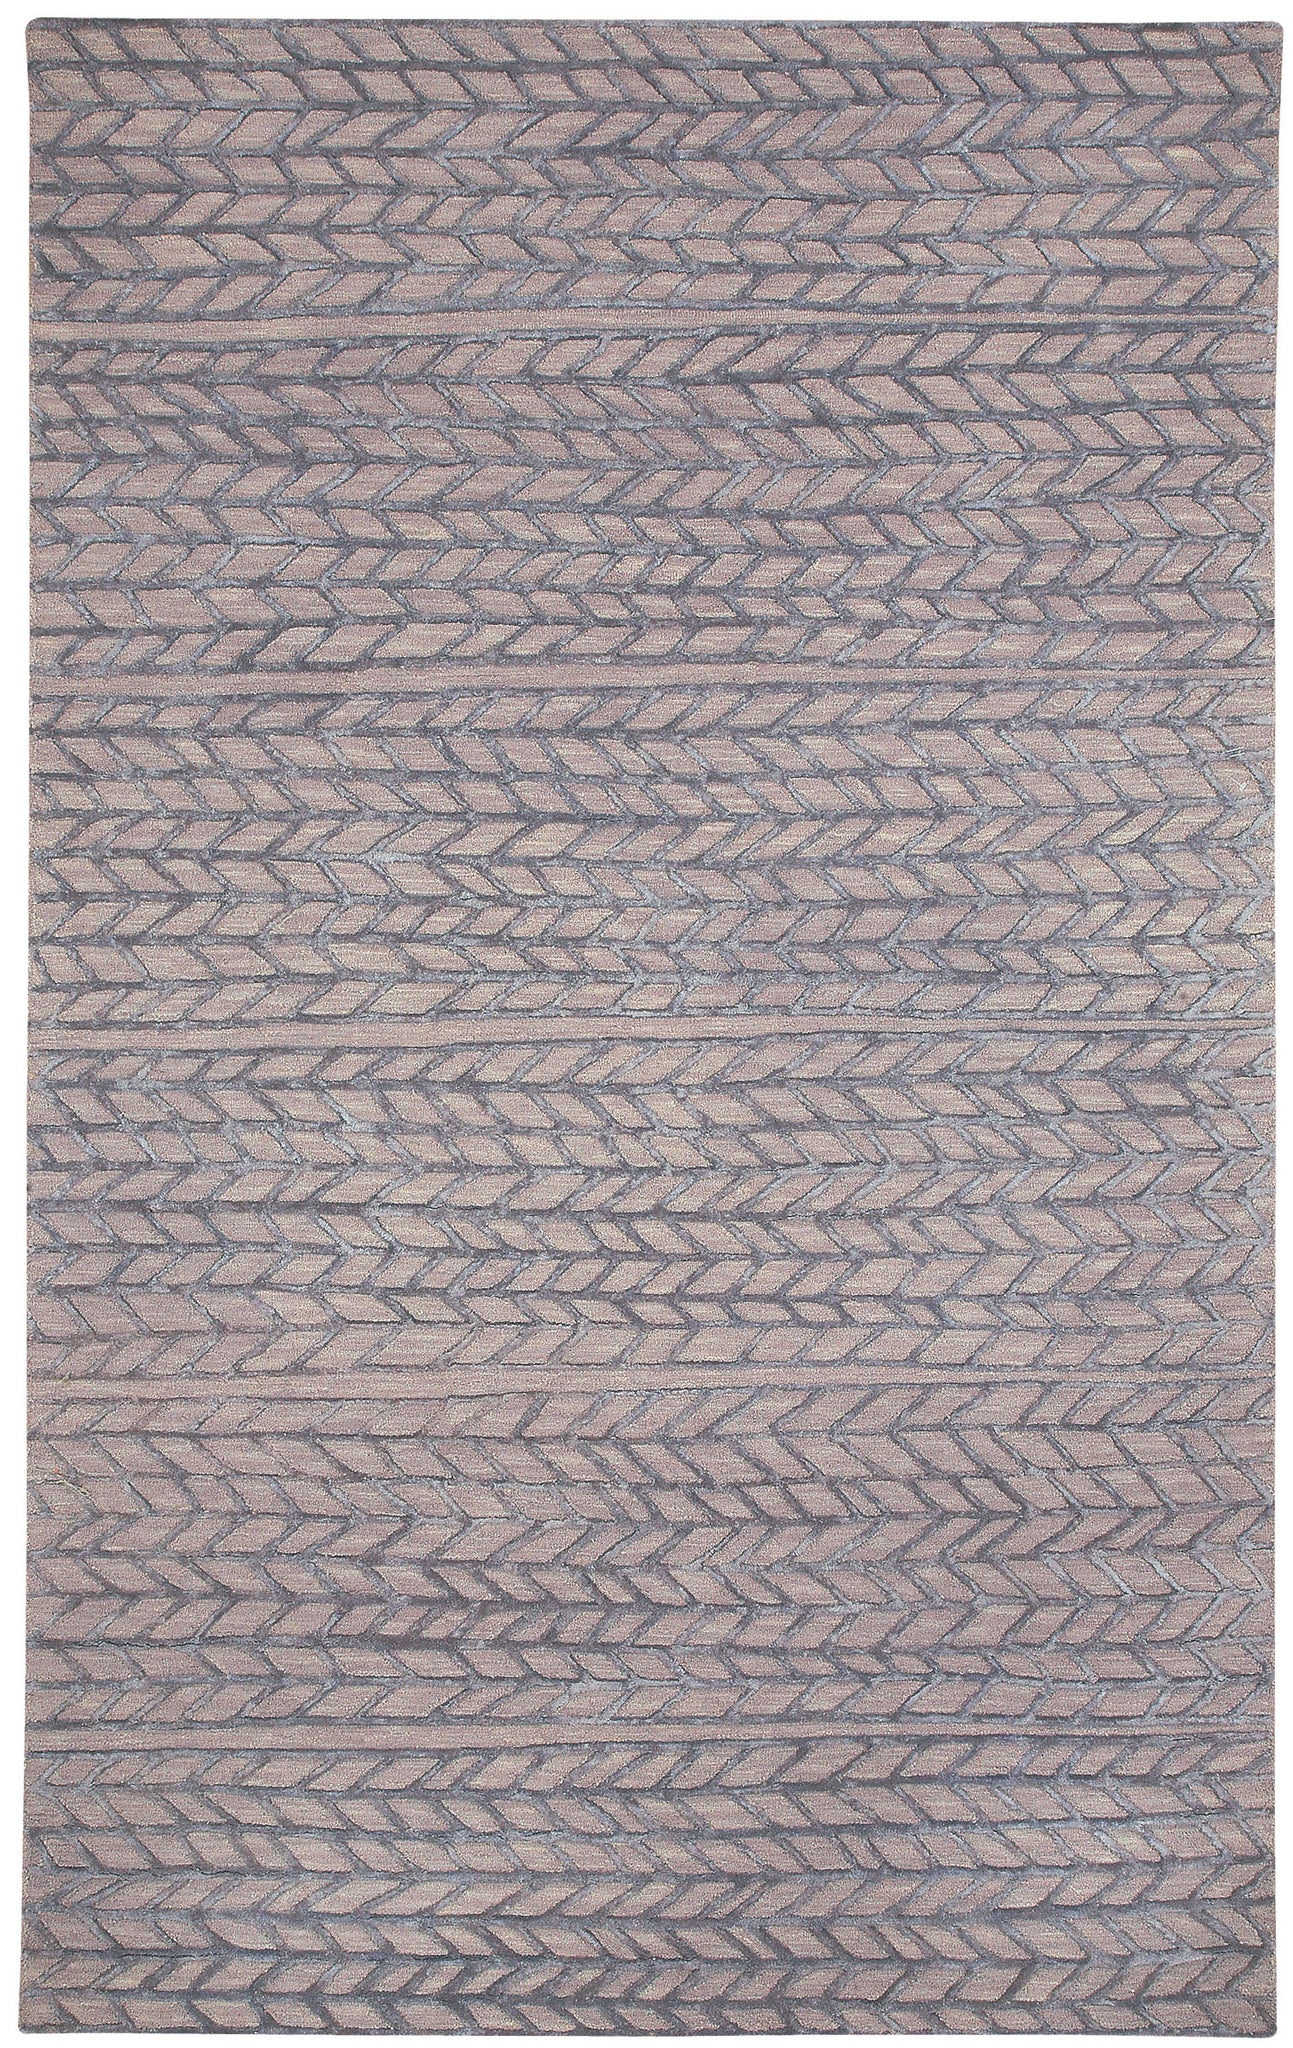 Capel Spear 3305 Violet 340 Area Rug by Genevieve Gorder main image